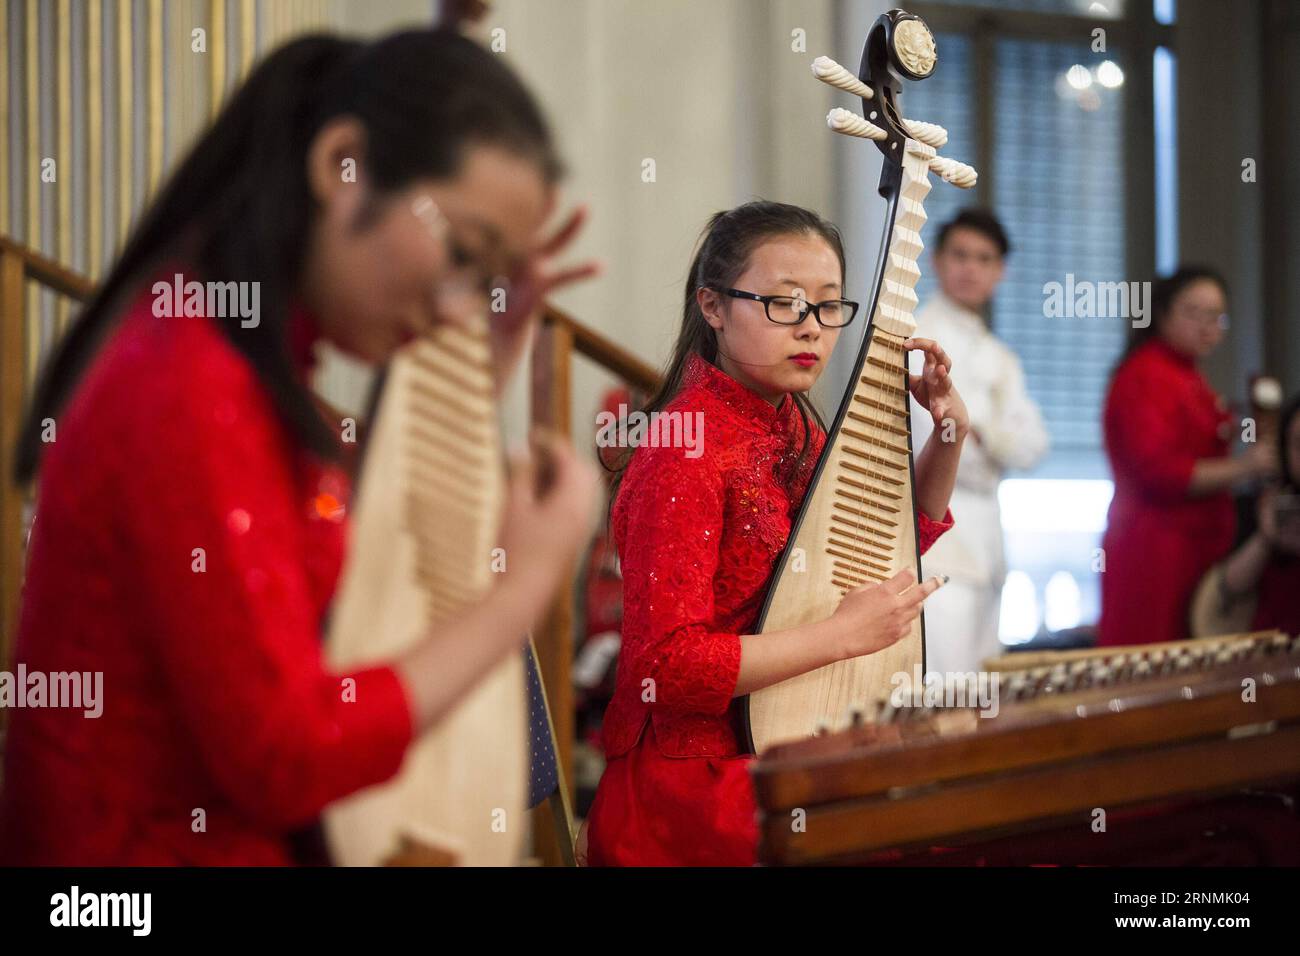 (170601) -- BUENOS AIRES, June 1, 2017 -- Members of the Juvenile Orchestra of the Shanghai Theatre Academy perform at the Palace of the Buenos Aires City Legislature in Buenos Aires, capital of Argentina, on May 30, 2017. The Juvenile Orchestra of the Shanghai Theatre Academy shined on Tuesday during a concert in Buenos Aires, which was held to mark the 45th anniversary of the establishment of diplomatic ties between China and Argentina. Martin Zabala)(zhf) ARGENTINA-BUENOS AIRES-CHINA-CONCERT e MARTINxZABALA PUBLICATIONxNOTxINxCHN   Buenos Aires June 1 2017 Members of The Juvenile Orchestra Stock Photo